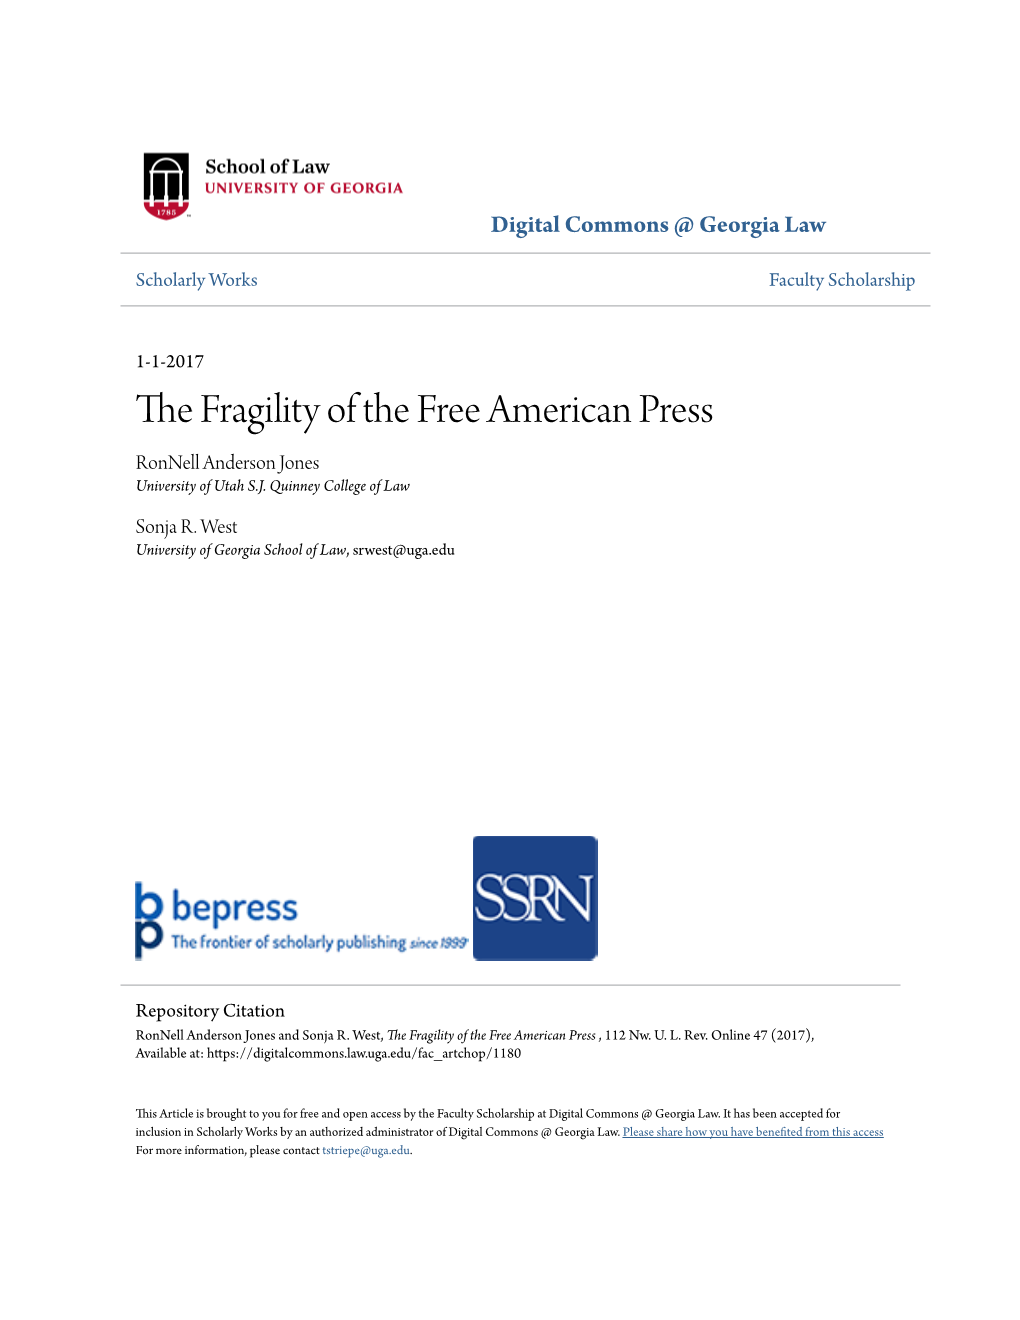 The Fragility of the Free American Press , 112 Nw